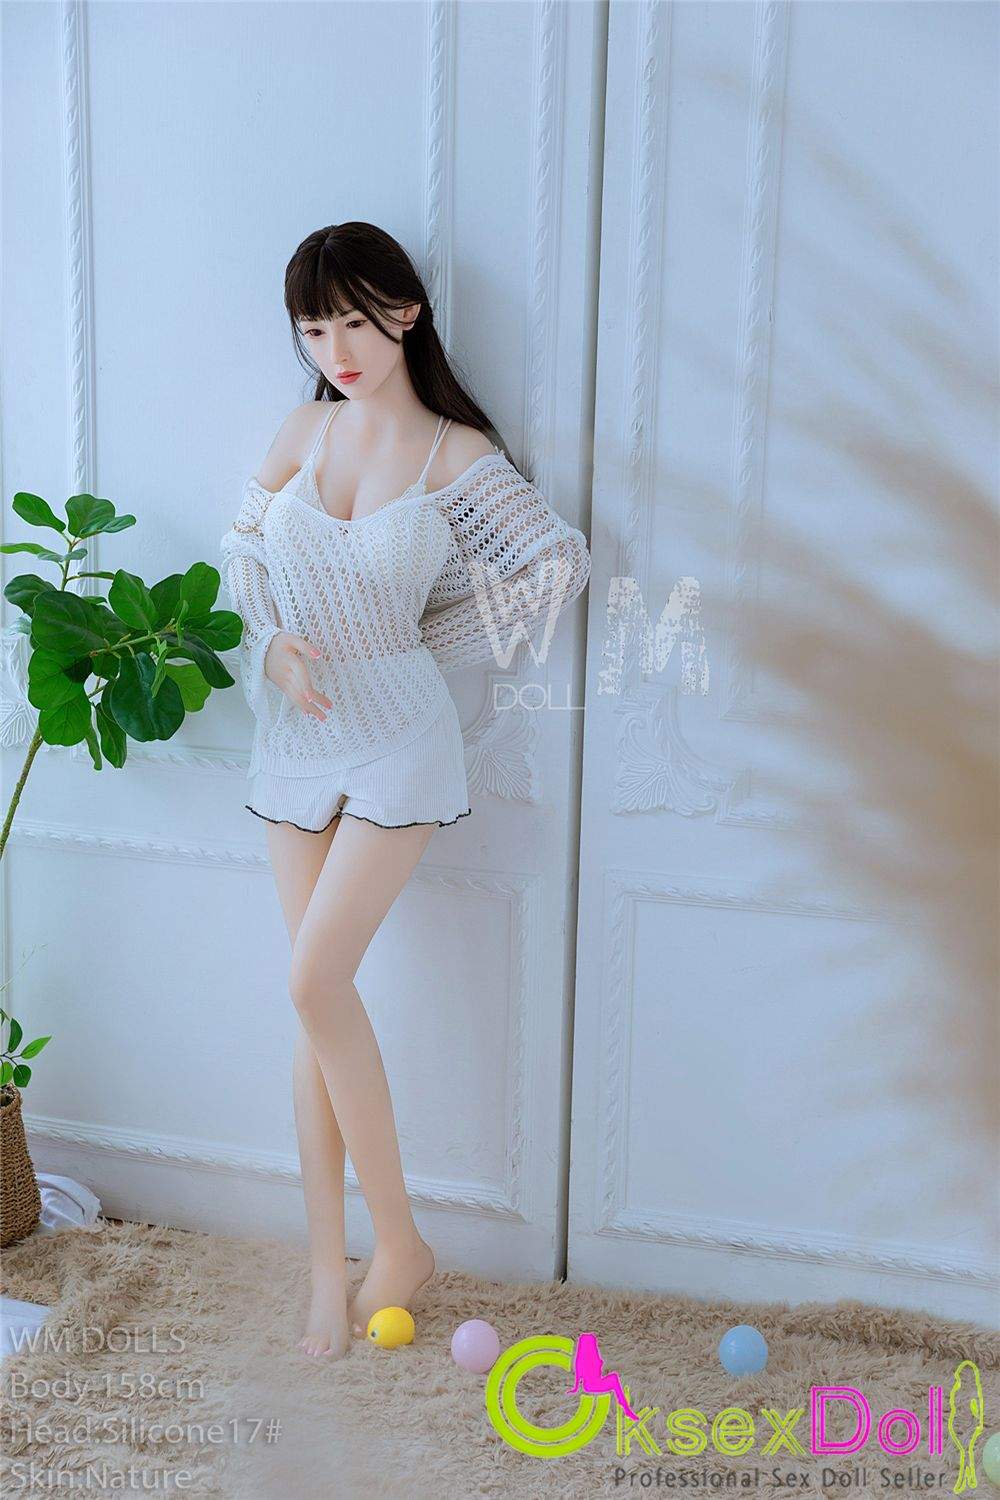 D cup real sex doll images